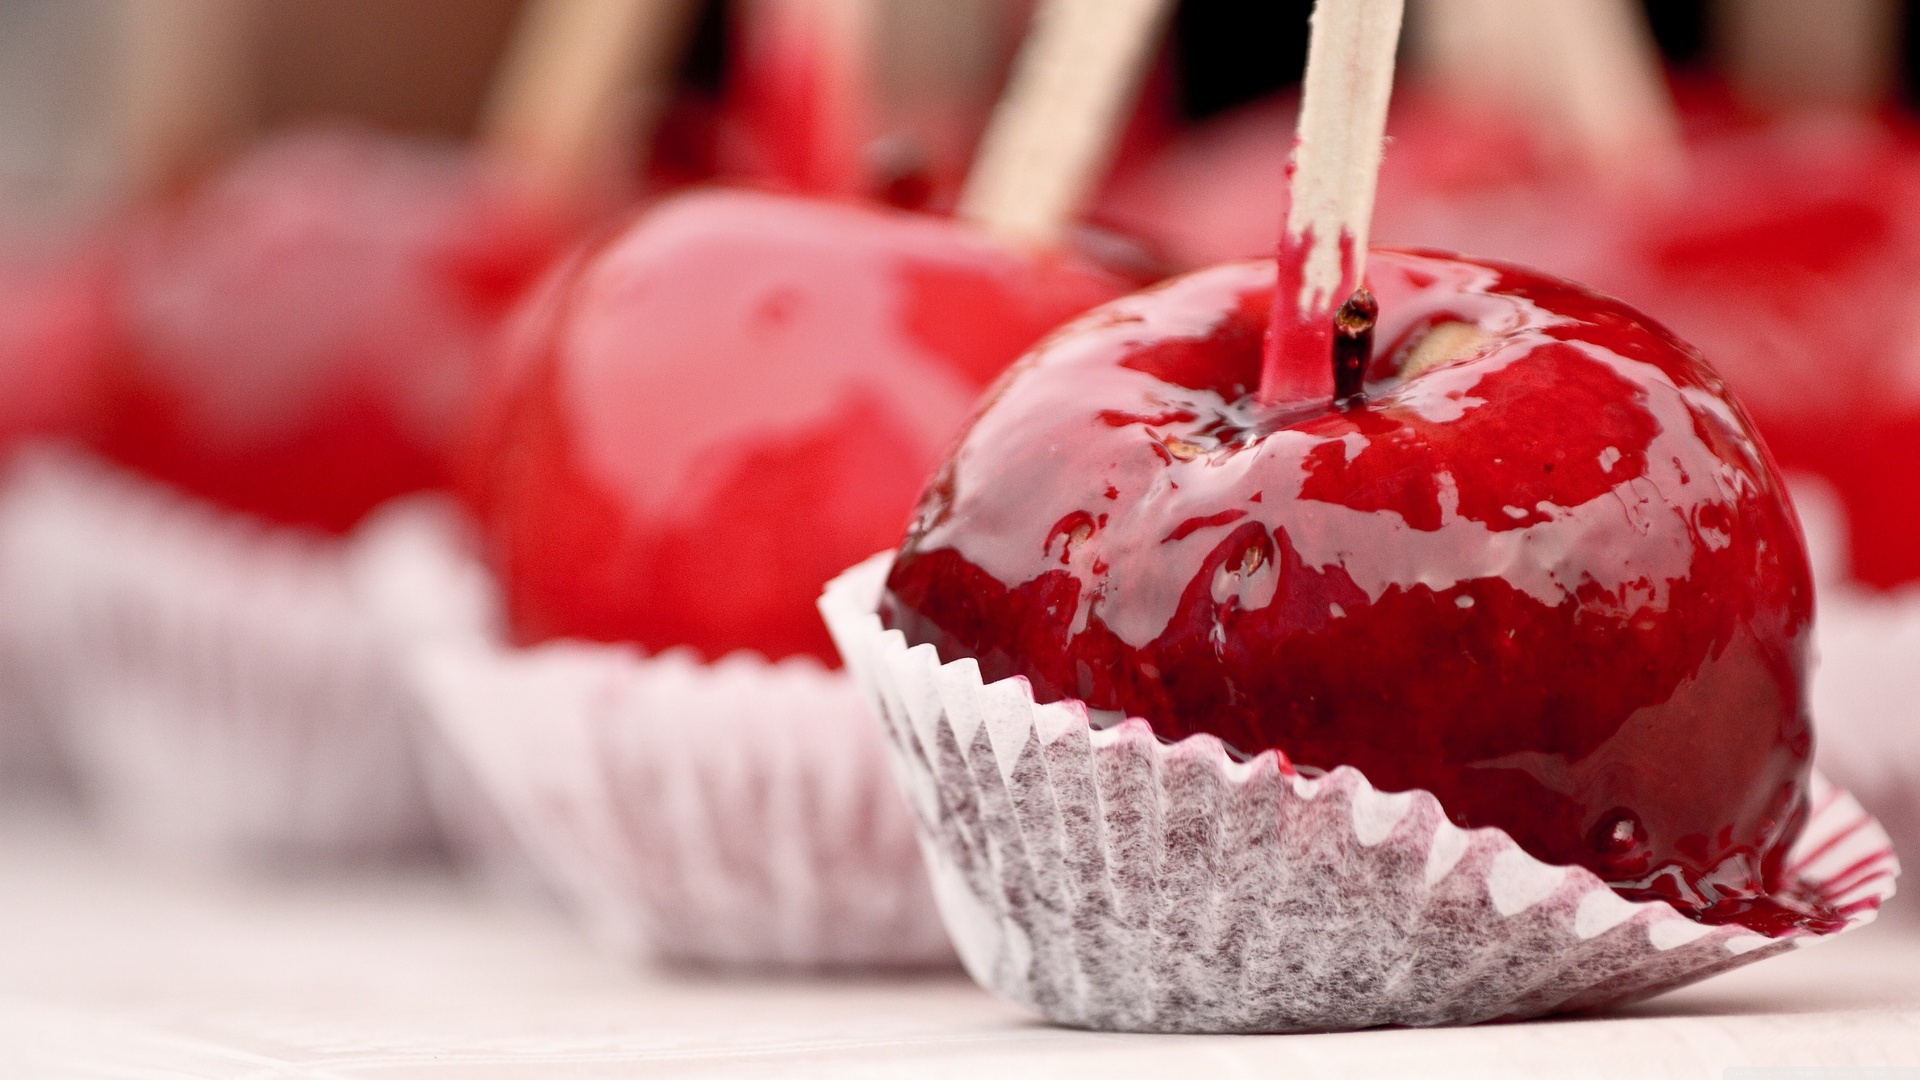 Food Red Cherry Syrup Candy Apple Sweets Wallpaper Background